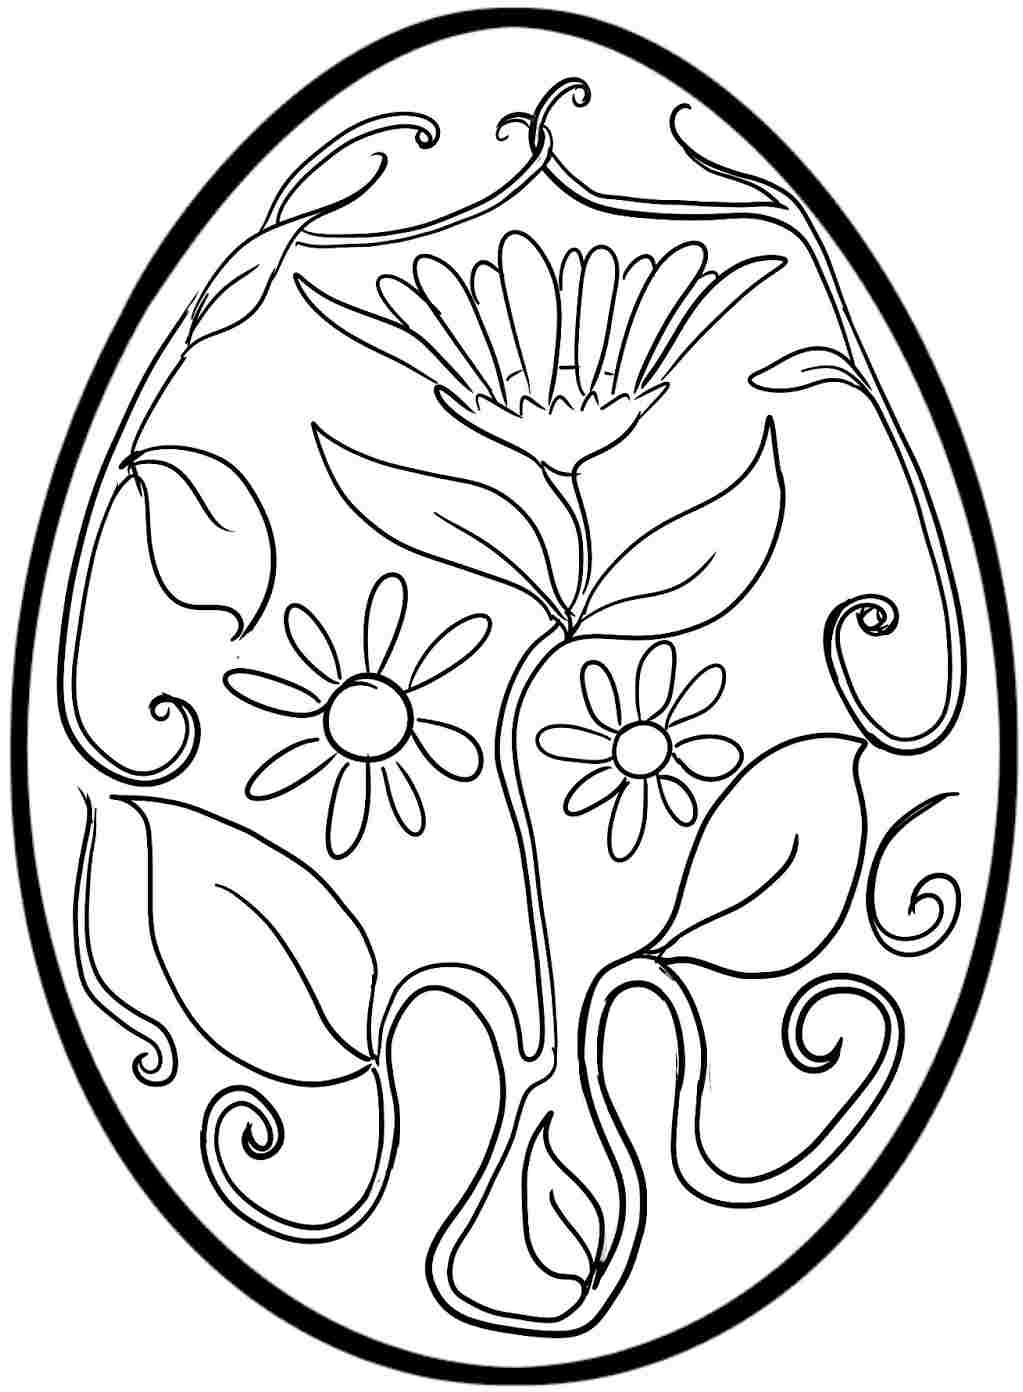 Printable Easter Egg Coloring Pages At GetColorings Free Printable Colorings Pages To 